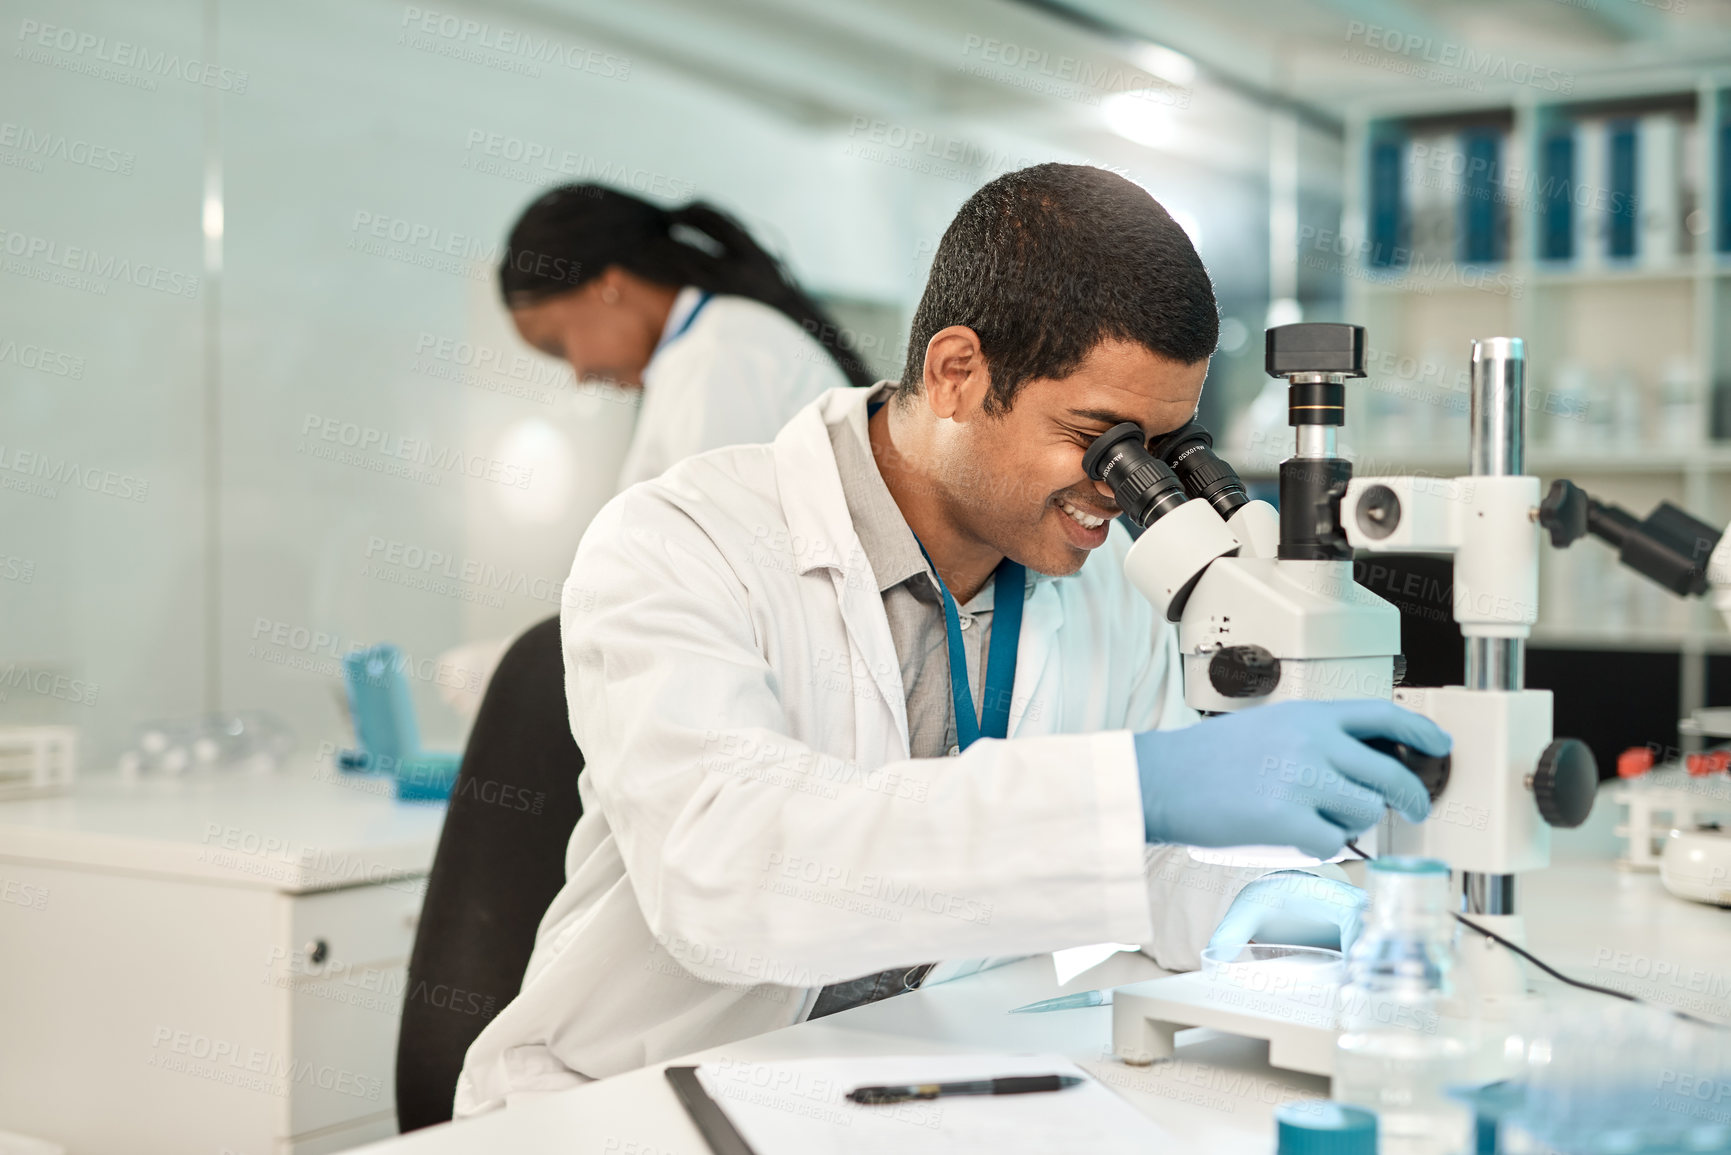 Buy stock photo Shot of a young scientist using a microscope in a lab